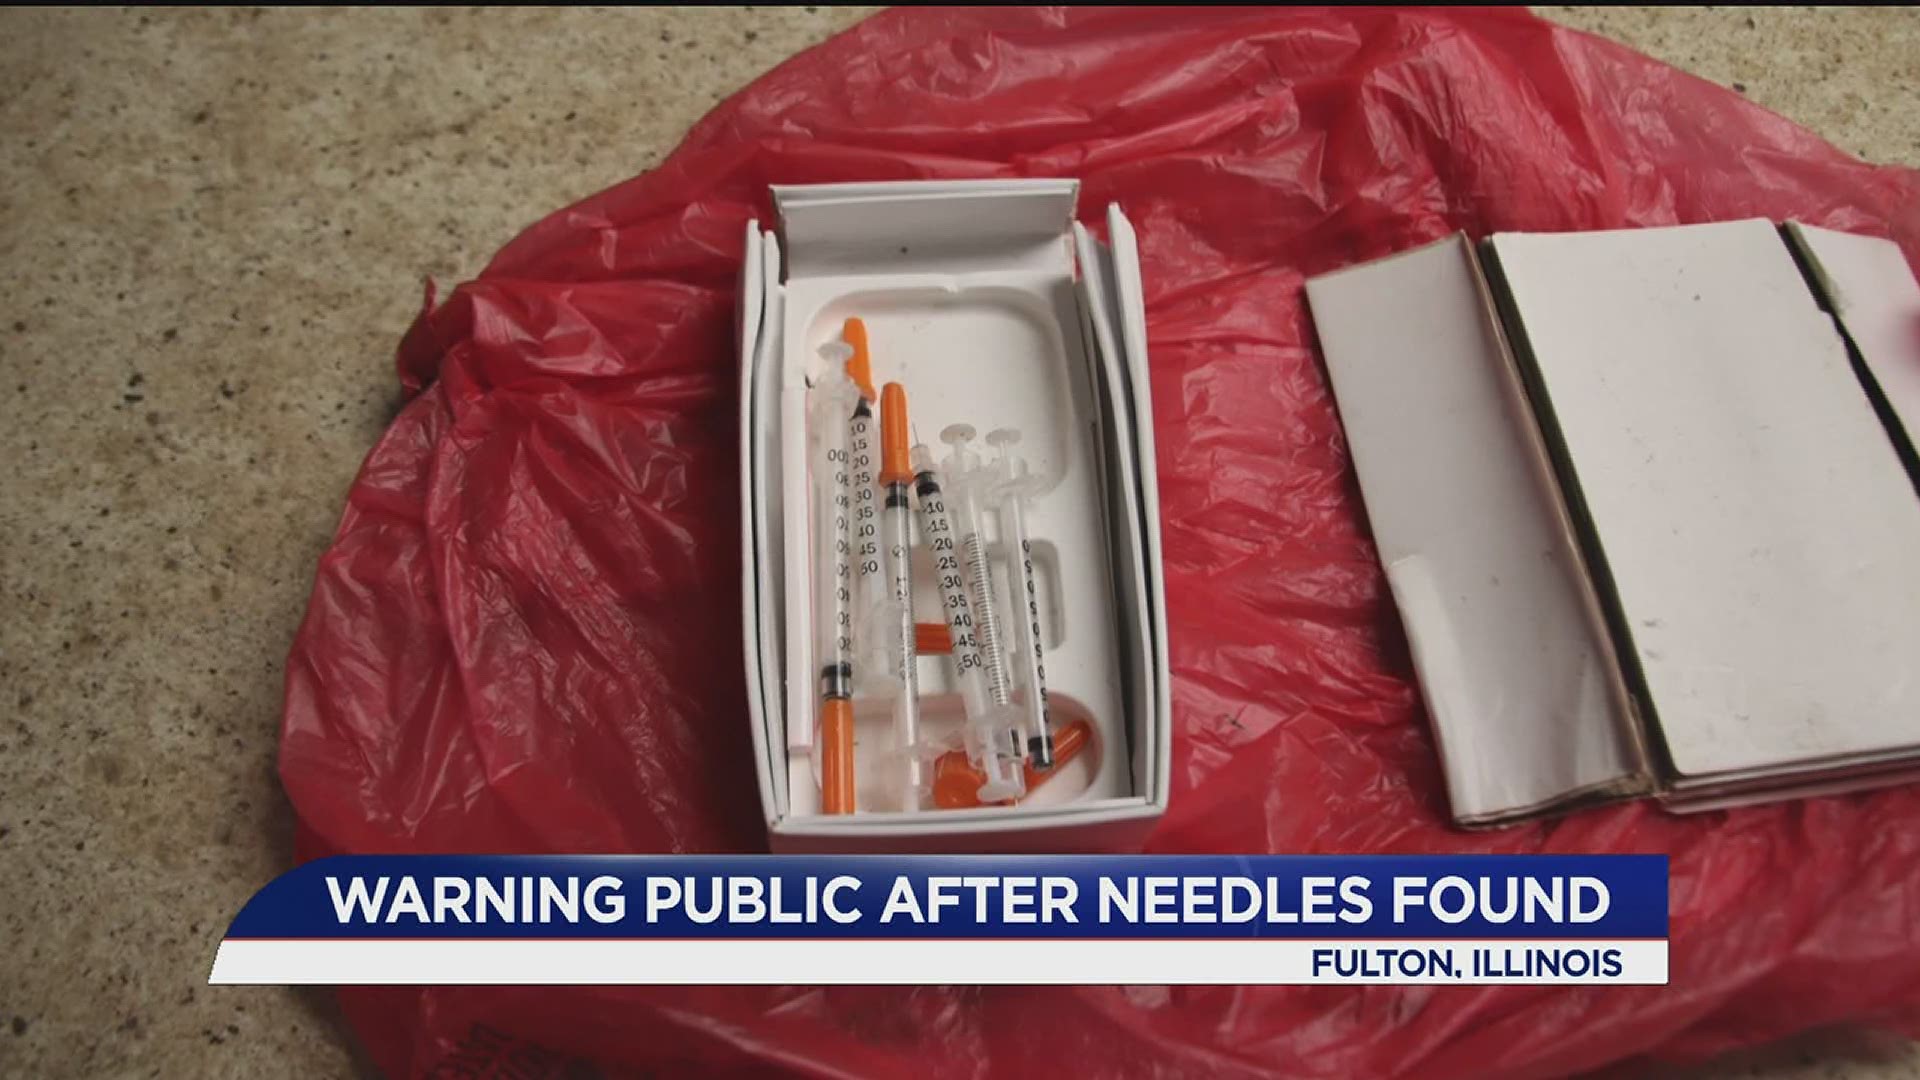 Fulton Issues Warning After Needles Found